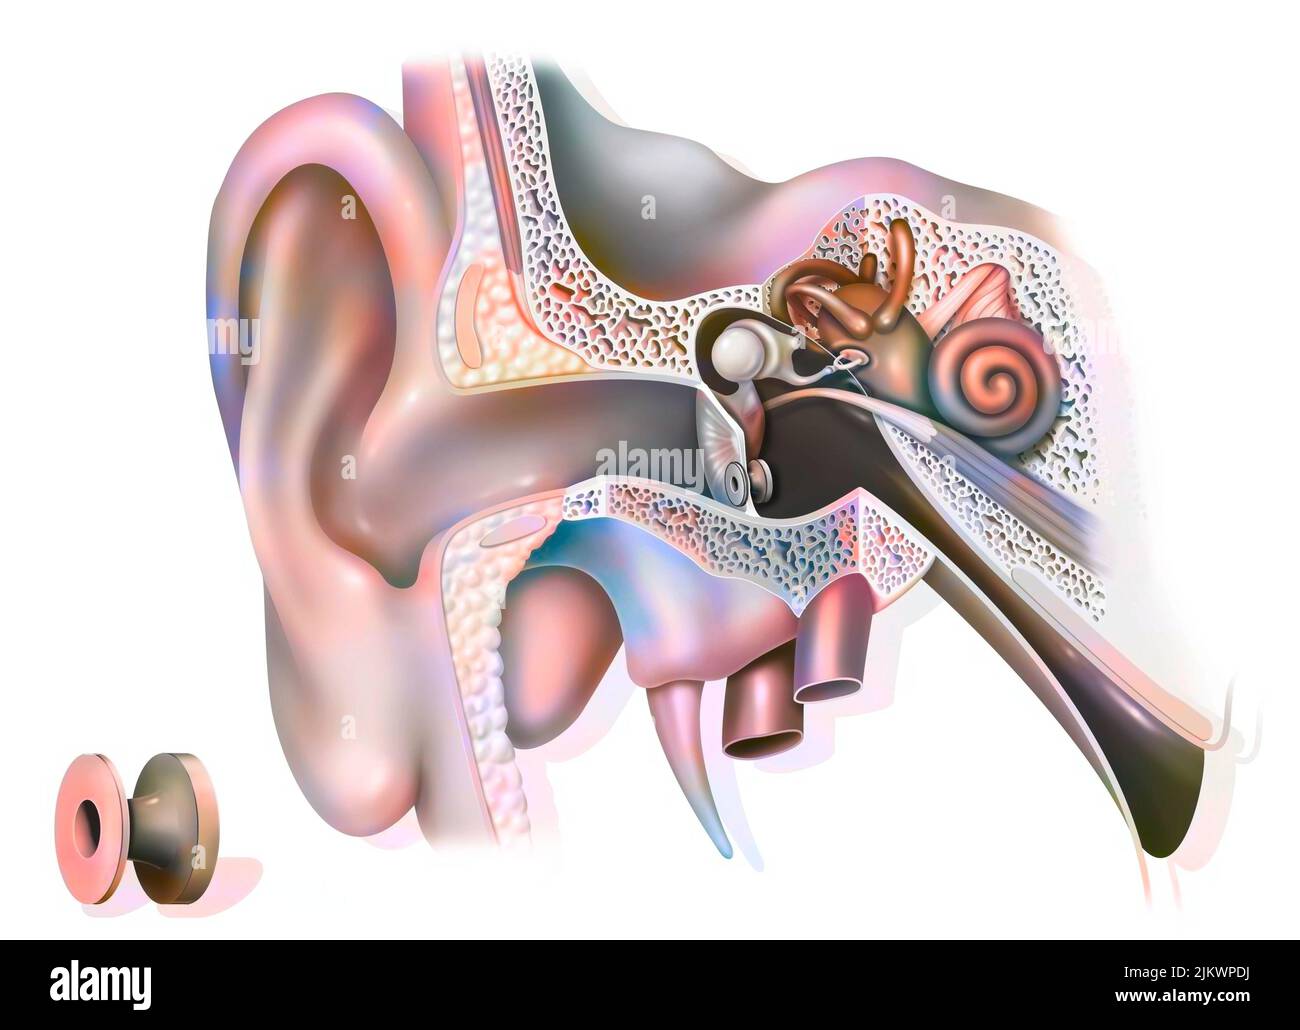 Otitis treatment: tympanic ventilator in the ear to promote ventilation of the ear. Stock Photo